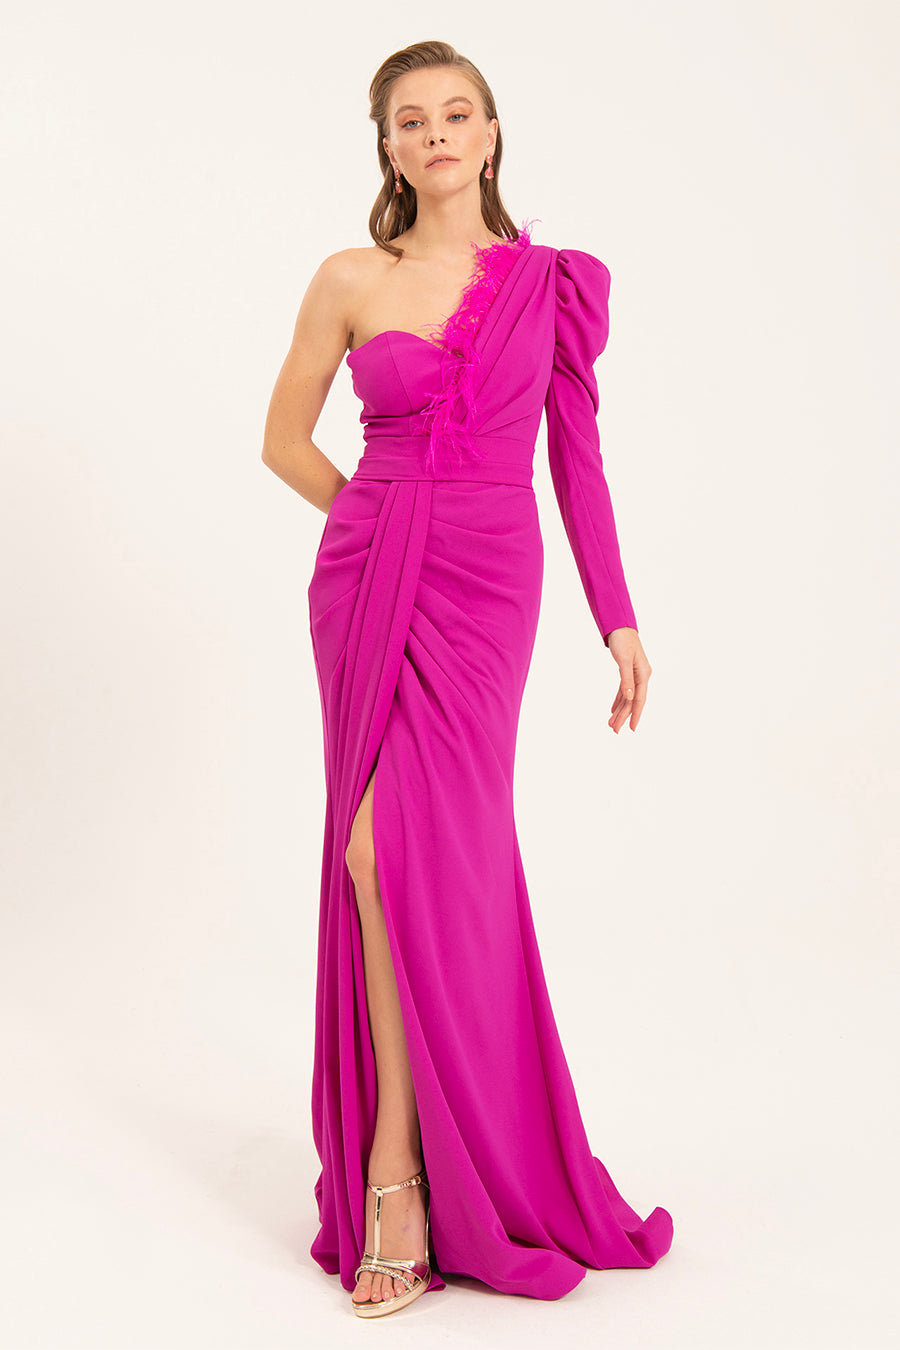 Mindy - Mystic Evenings | Evening and Prom Dresses